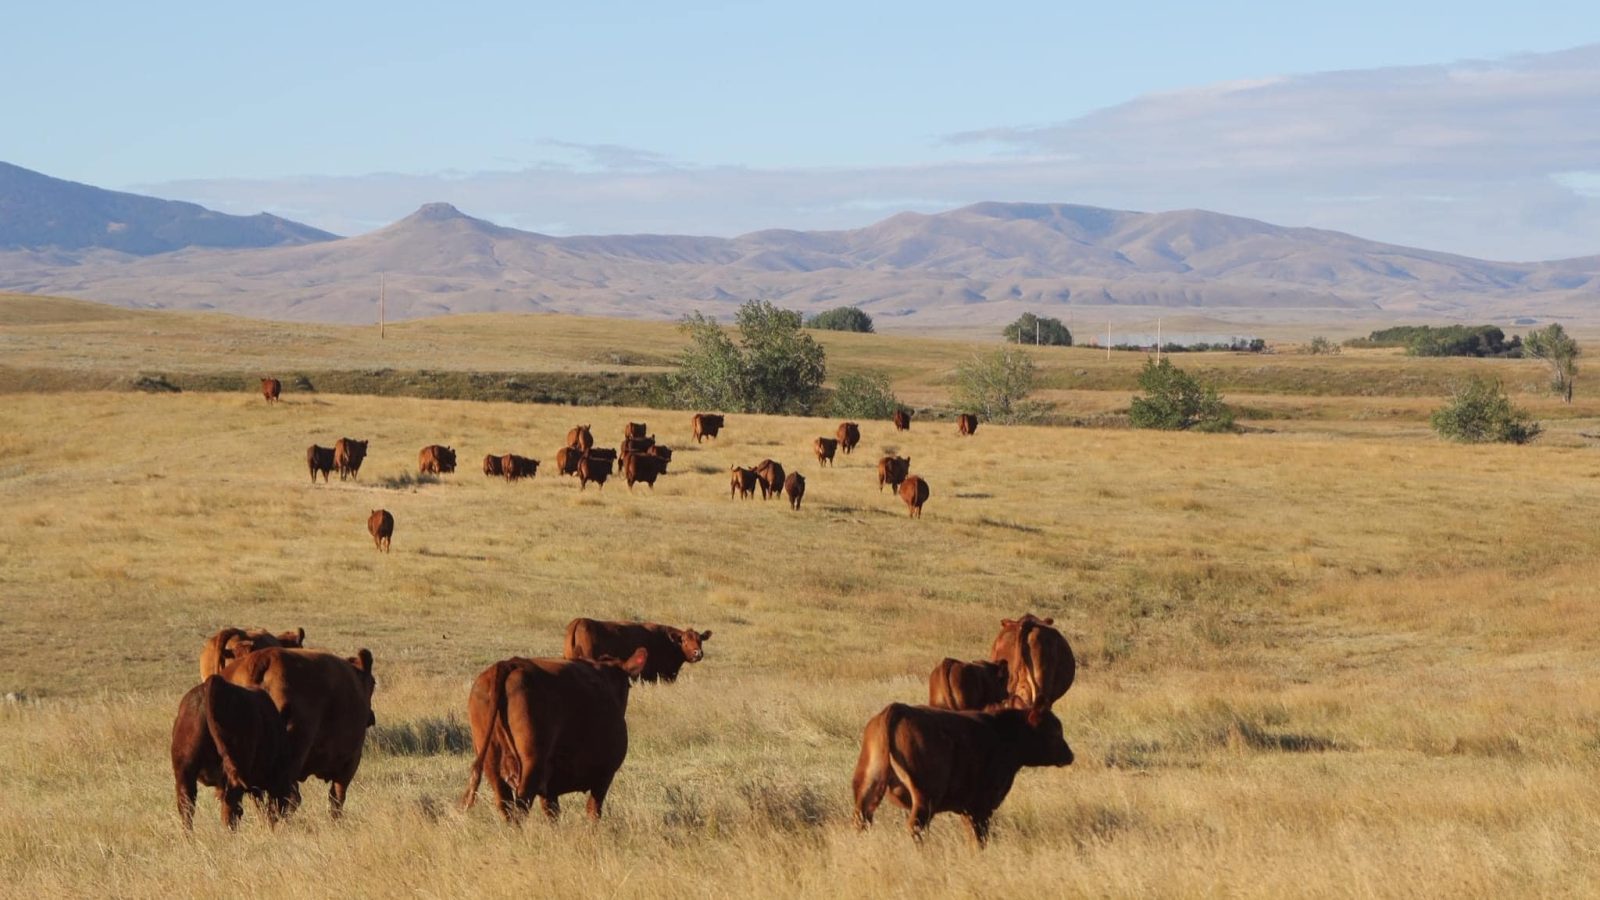 Red angus in a Montana landscape